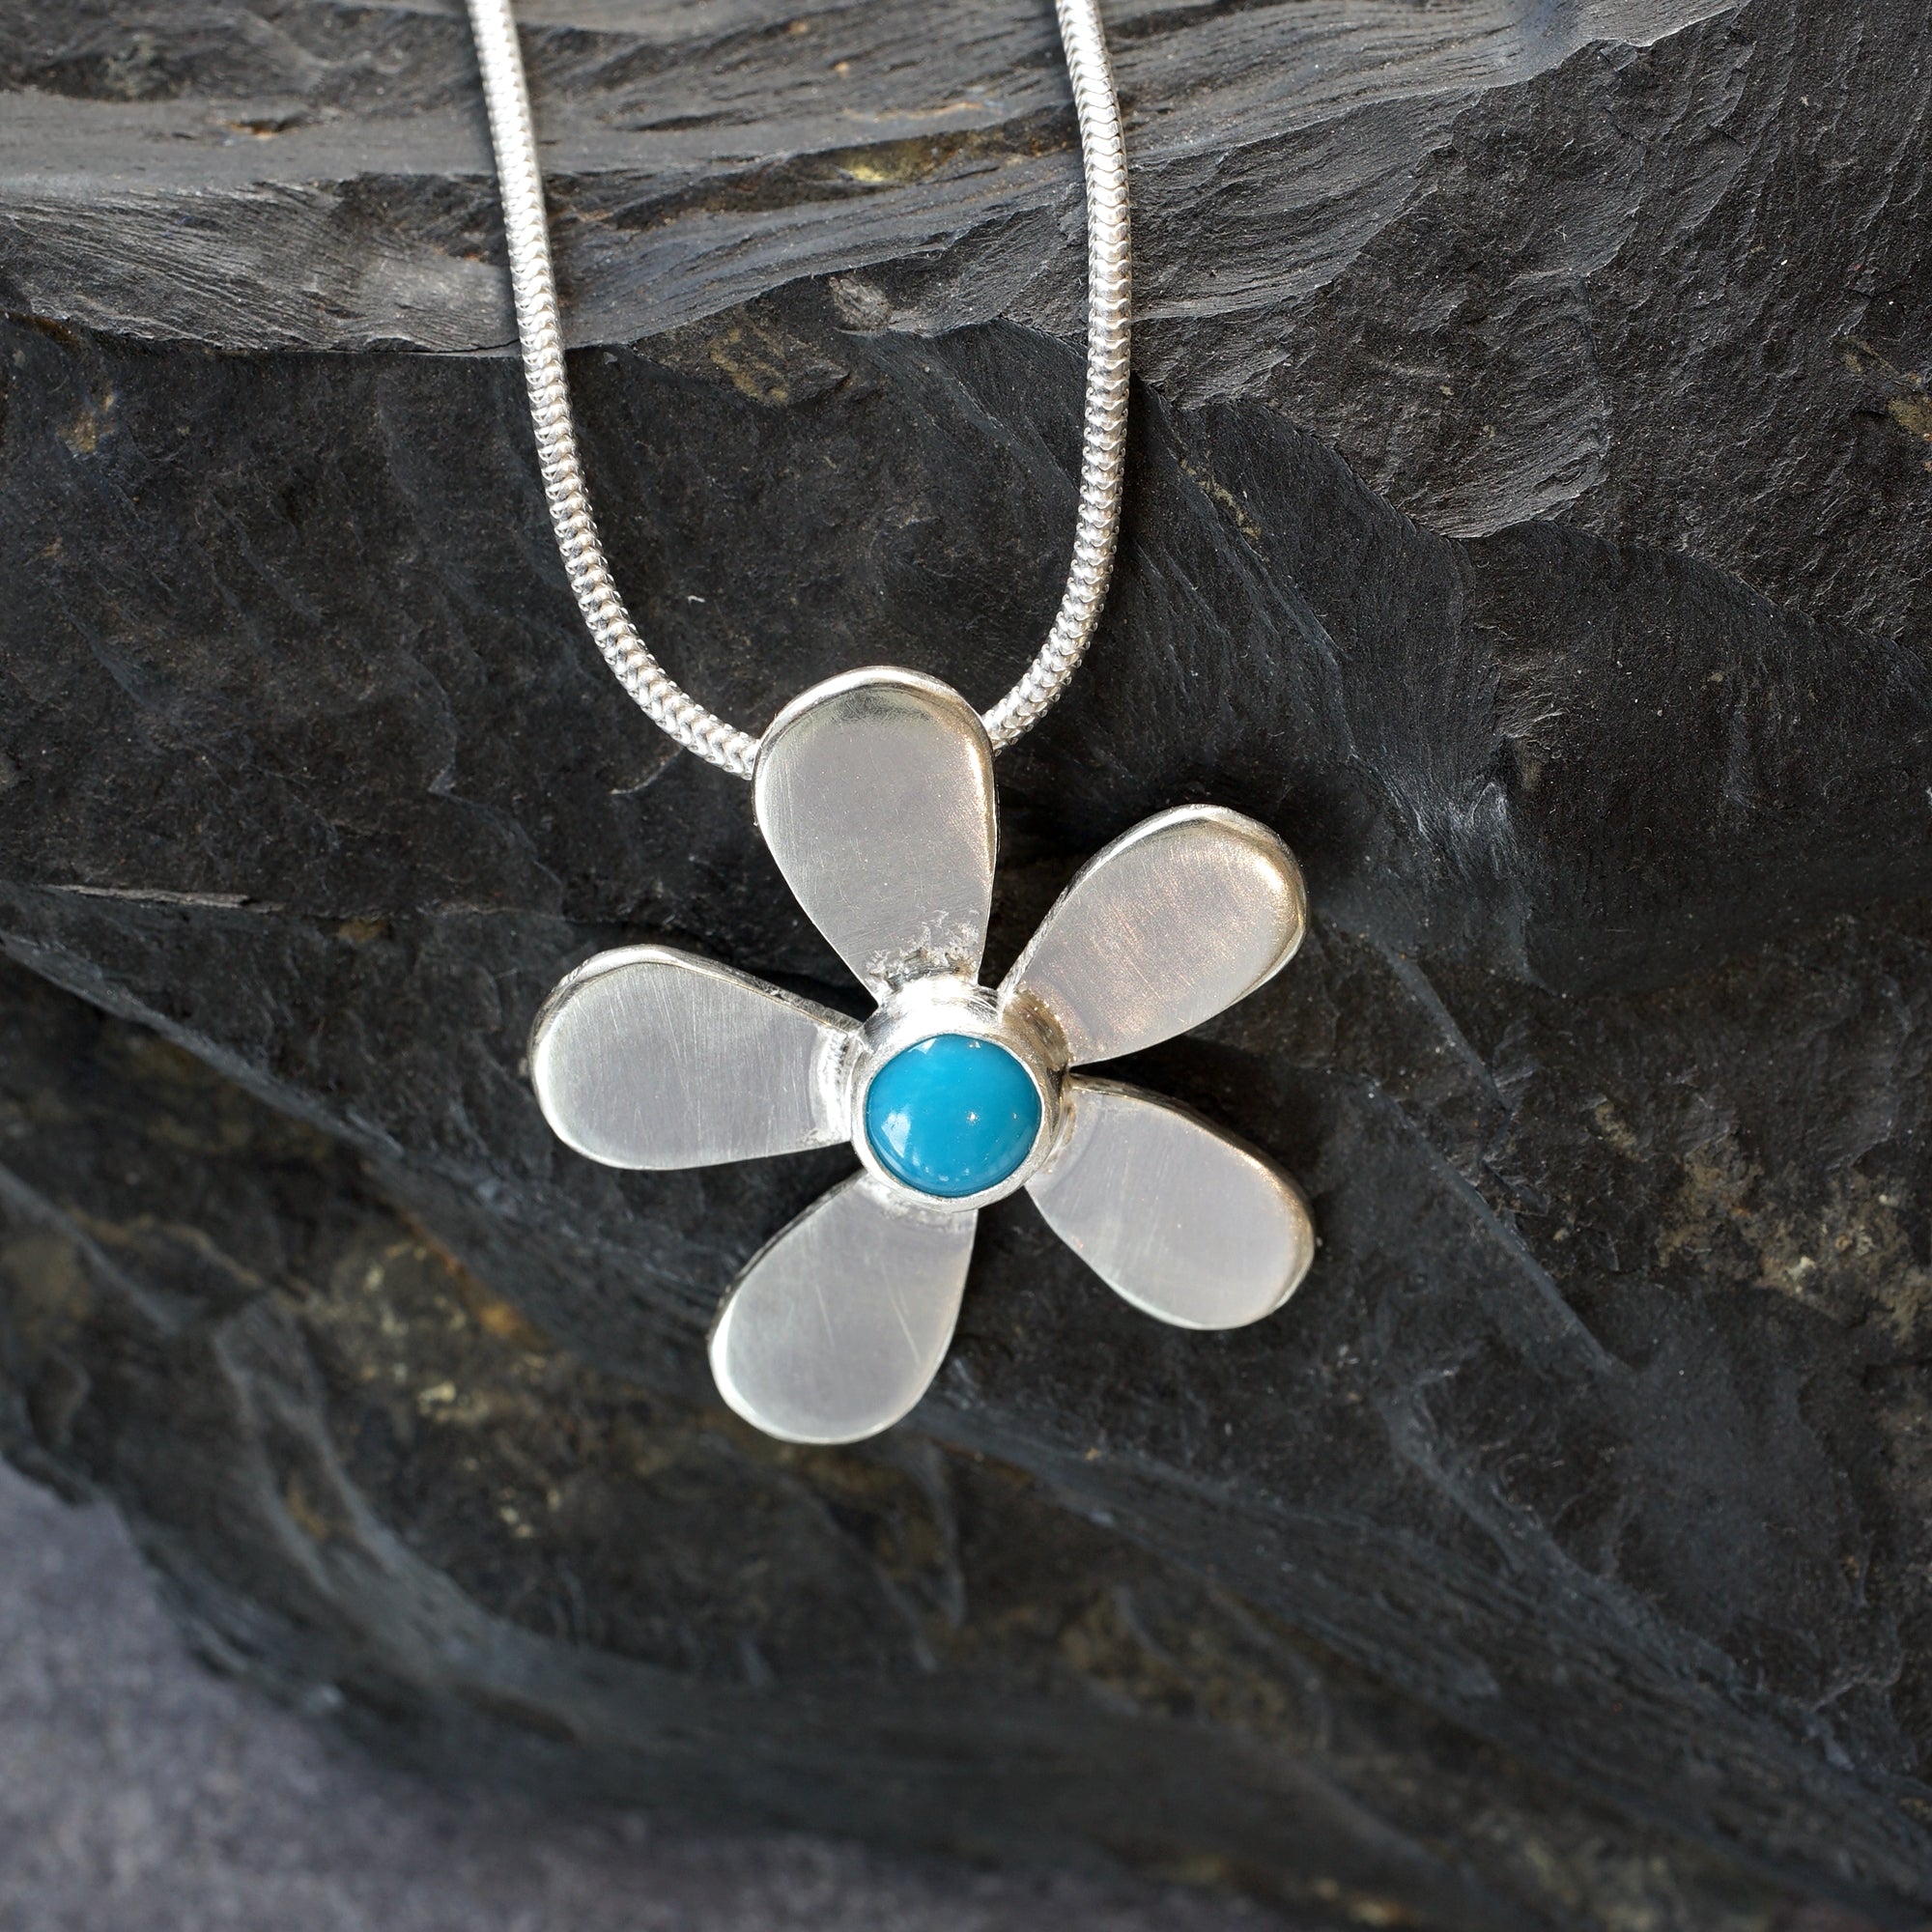 DC02P Daisy Chain Sterling Silver & Turquoise Pendant (2 sizes)